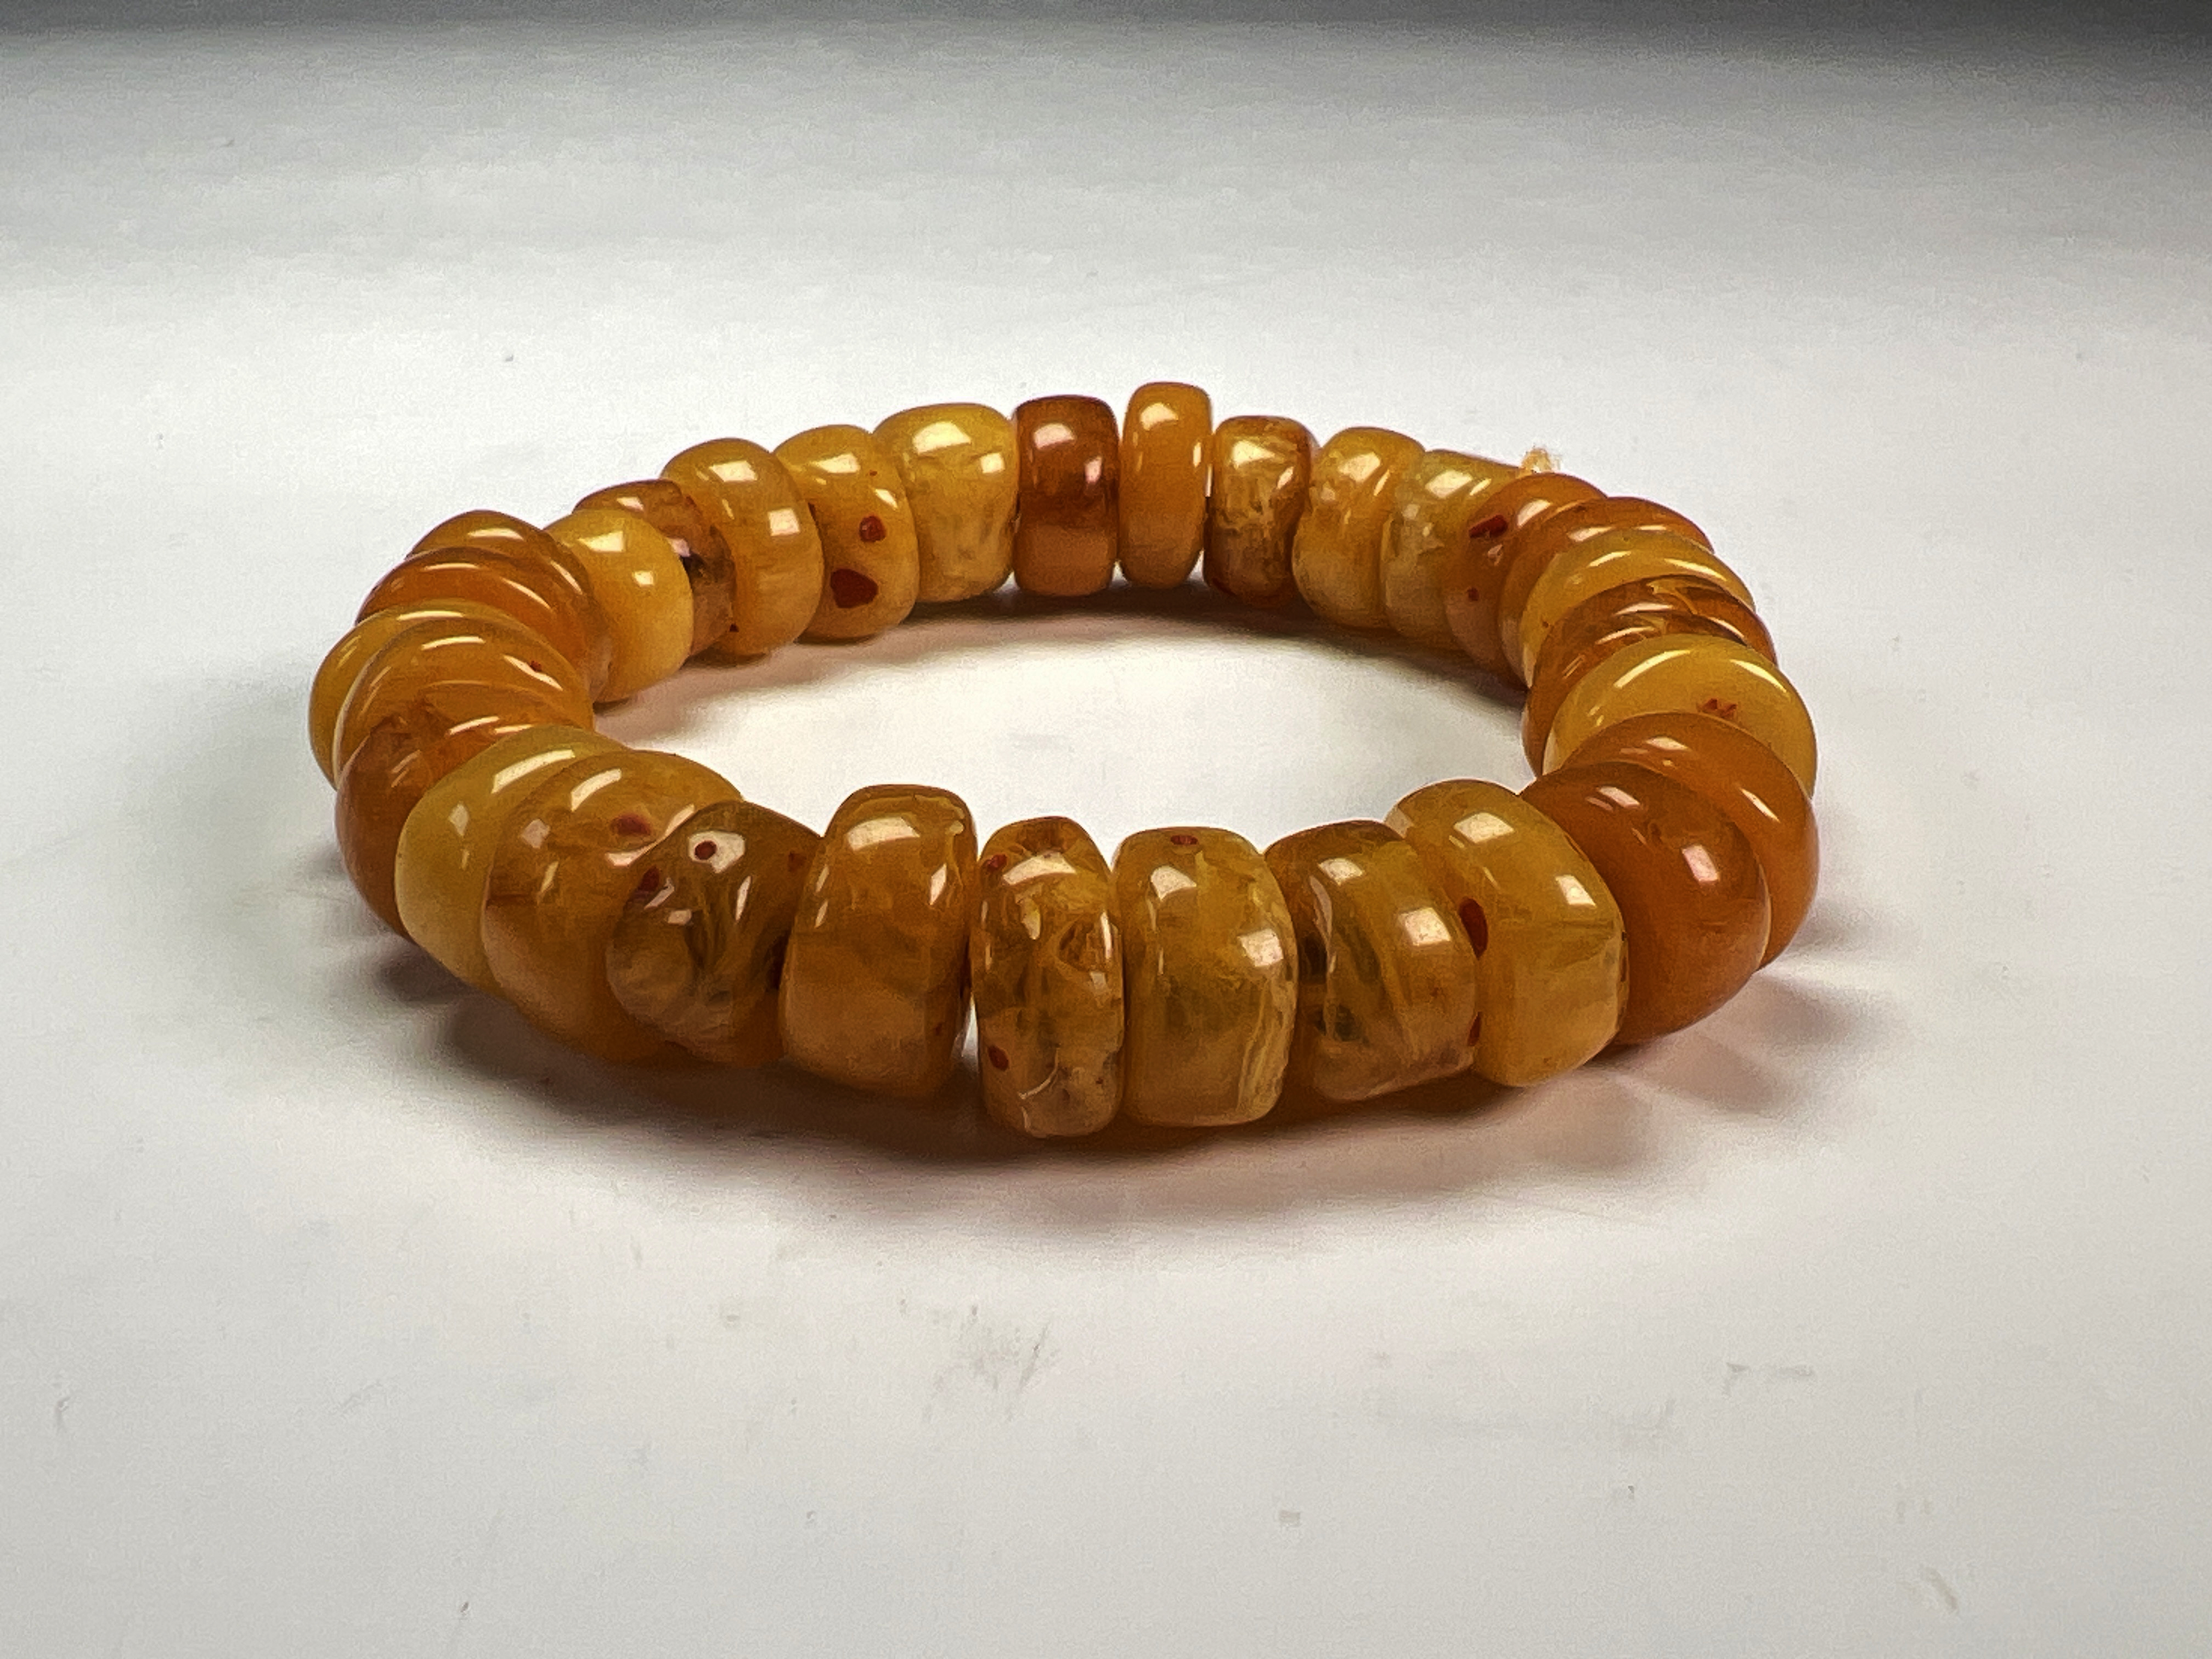 Exquisite Amber-Colored Chinese Bracelet - Timeless Elegance image 2